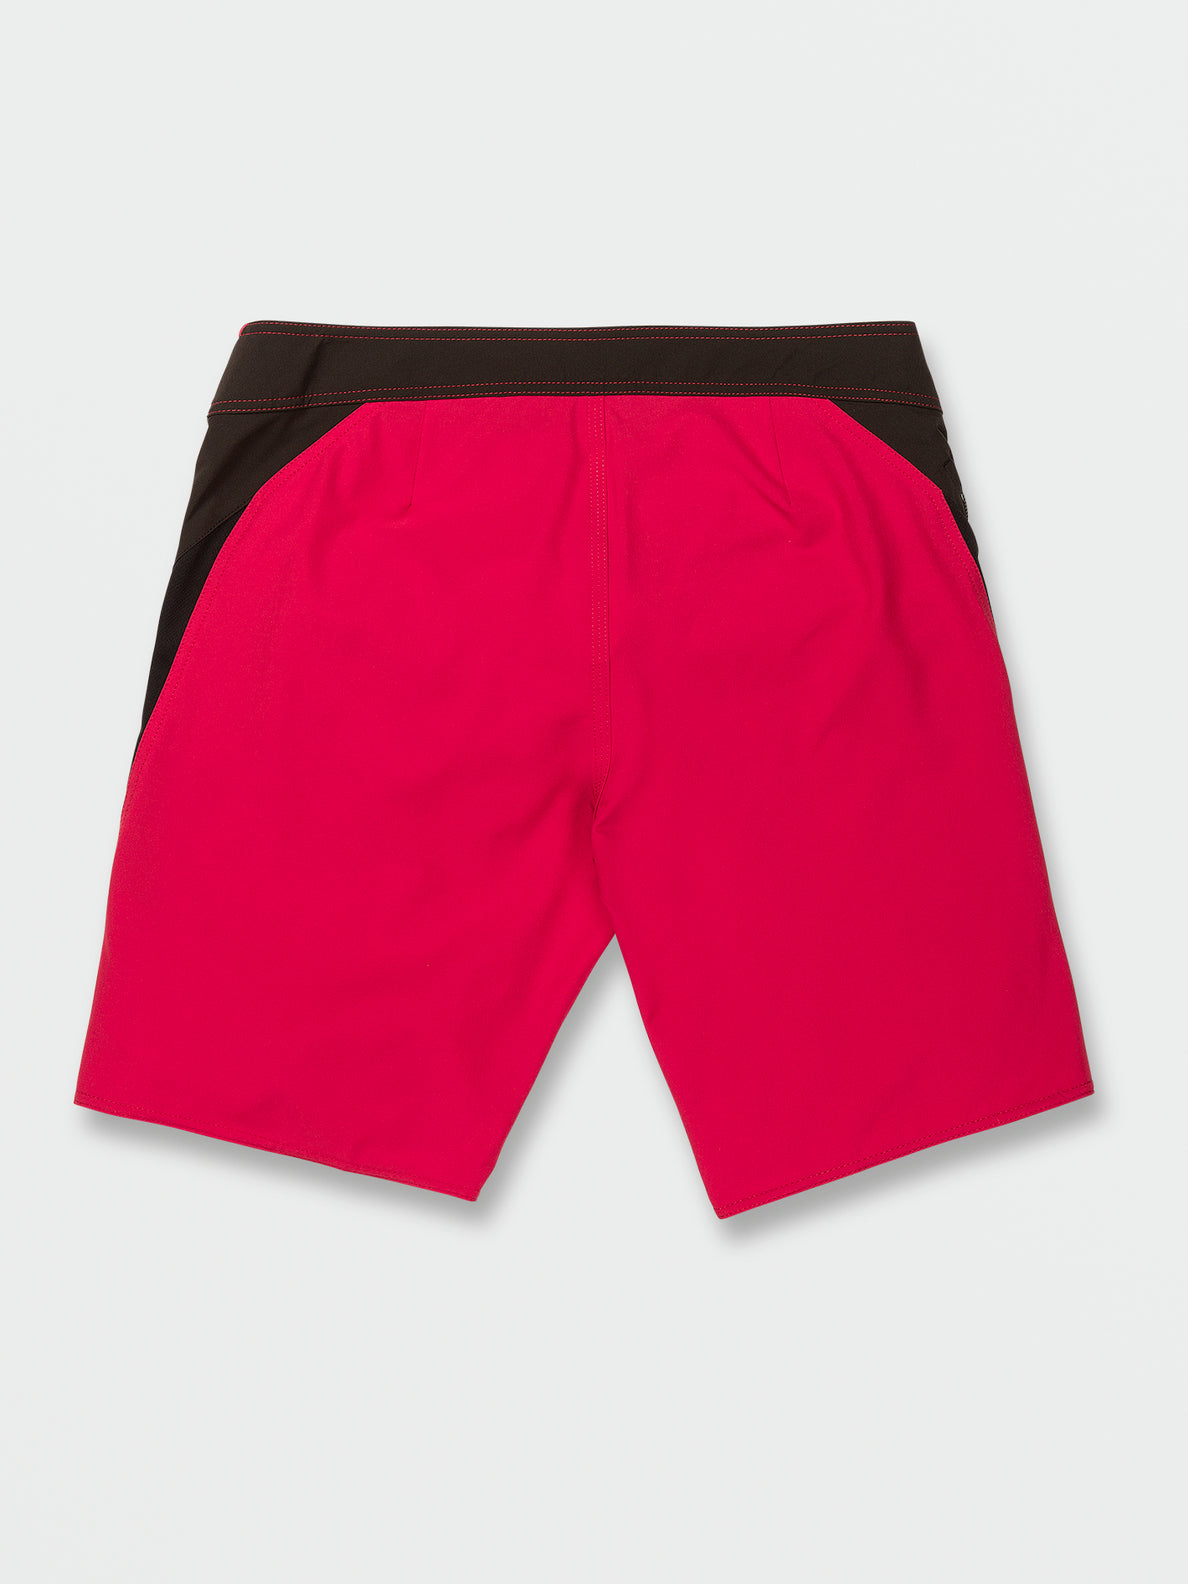 Surf Vitals Jack Robinson Mod-Tech Trunks - Red (A0812301_RED) [B]